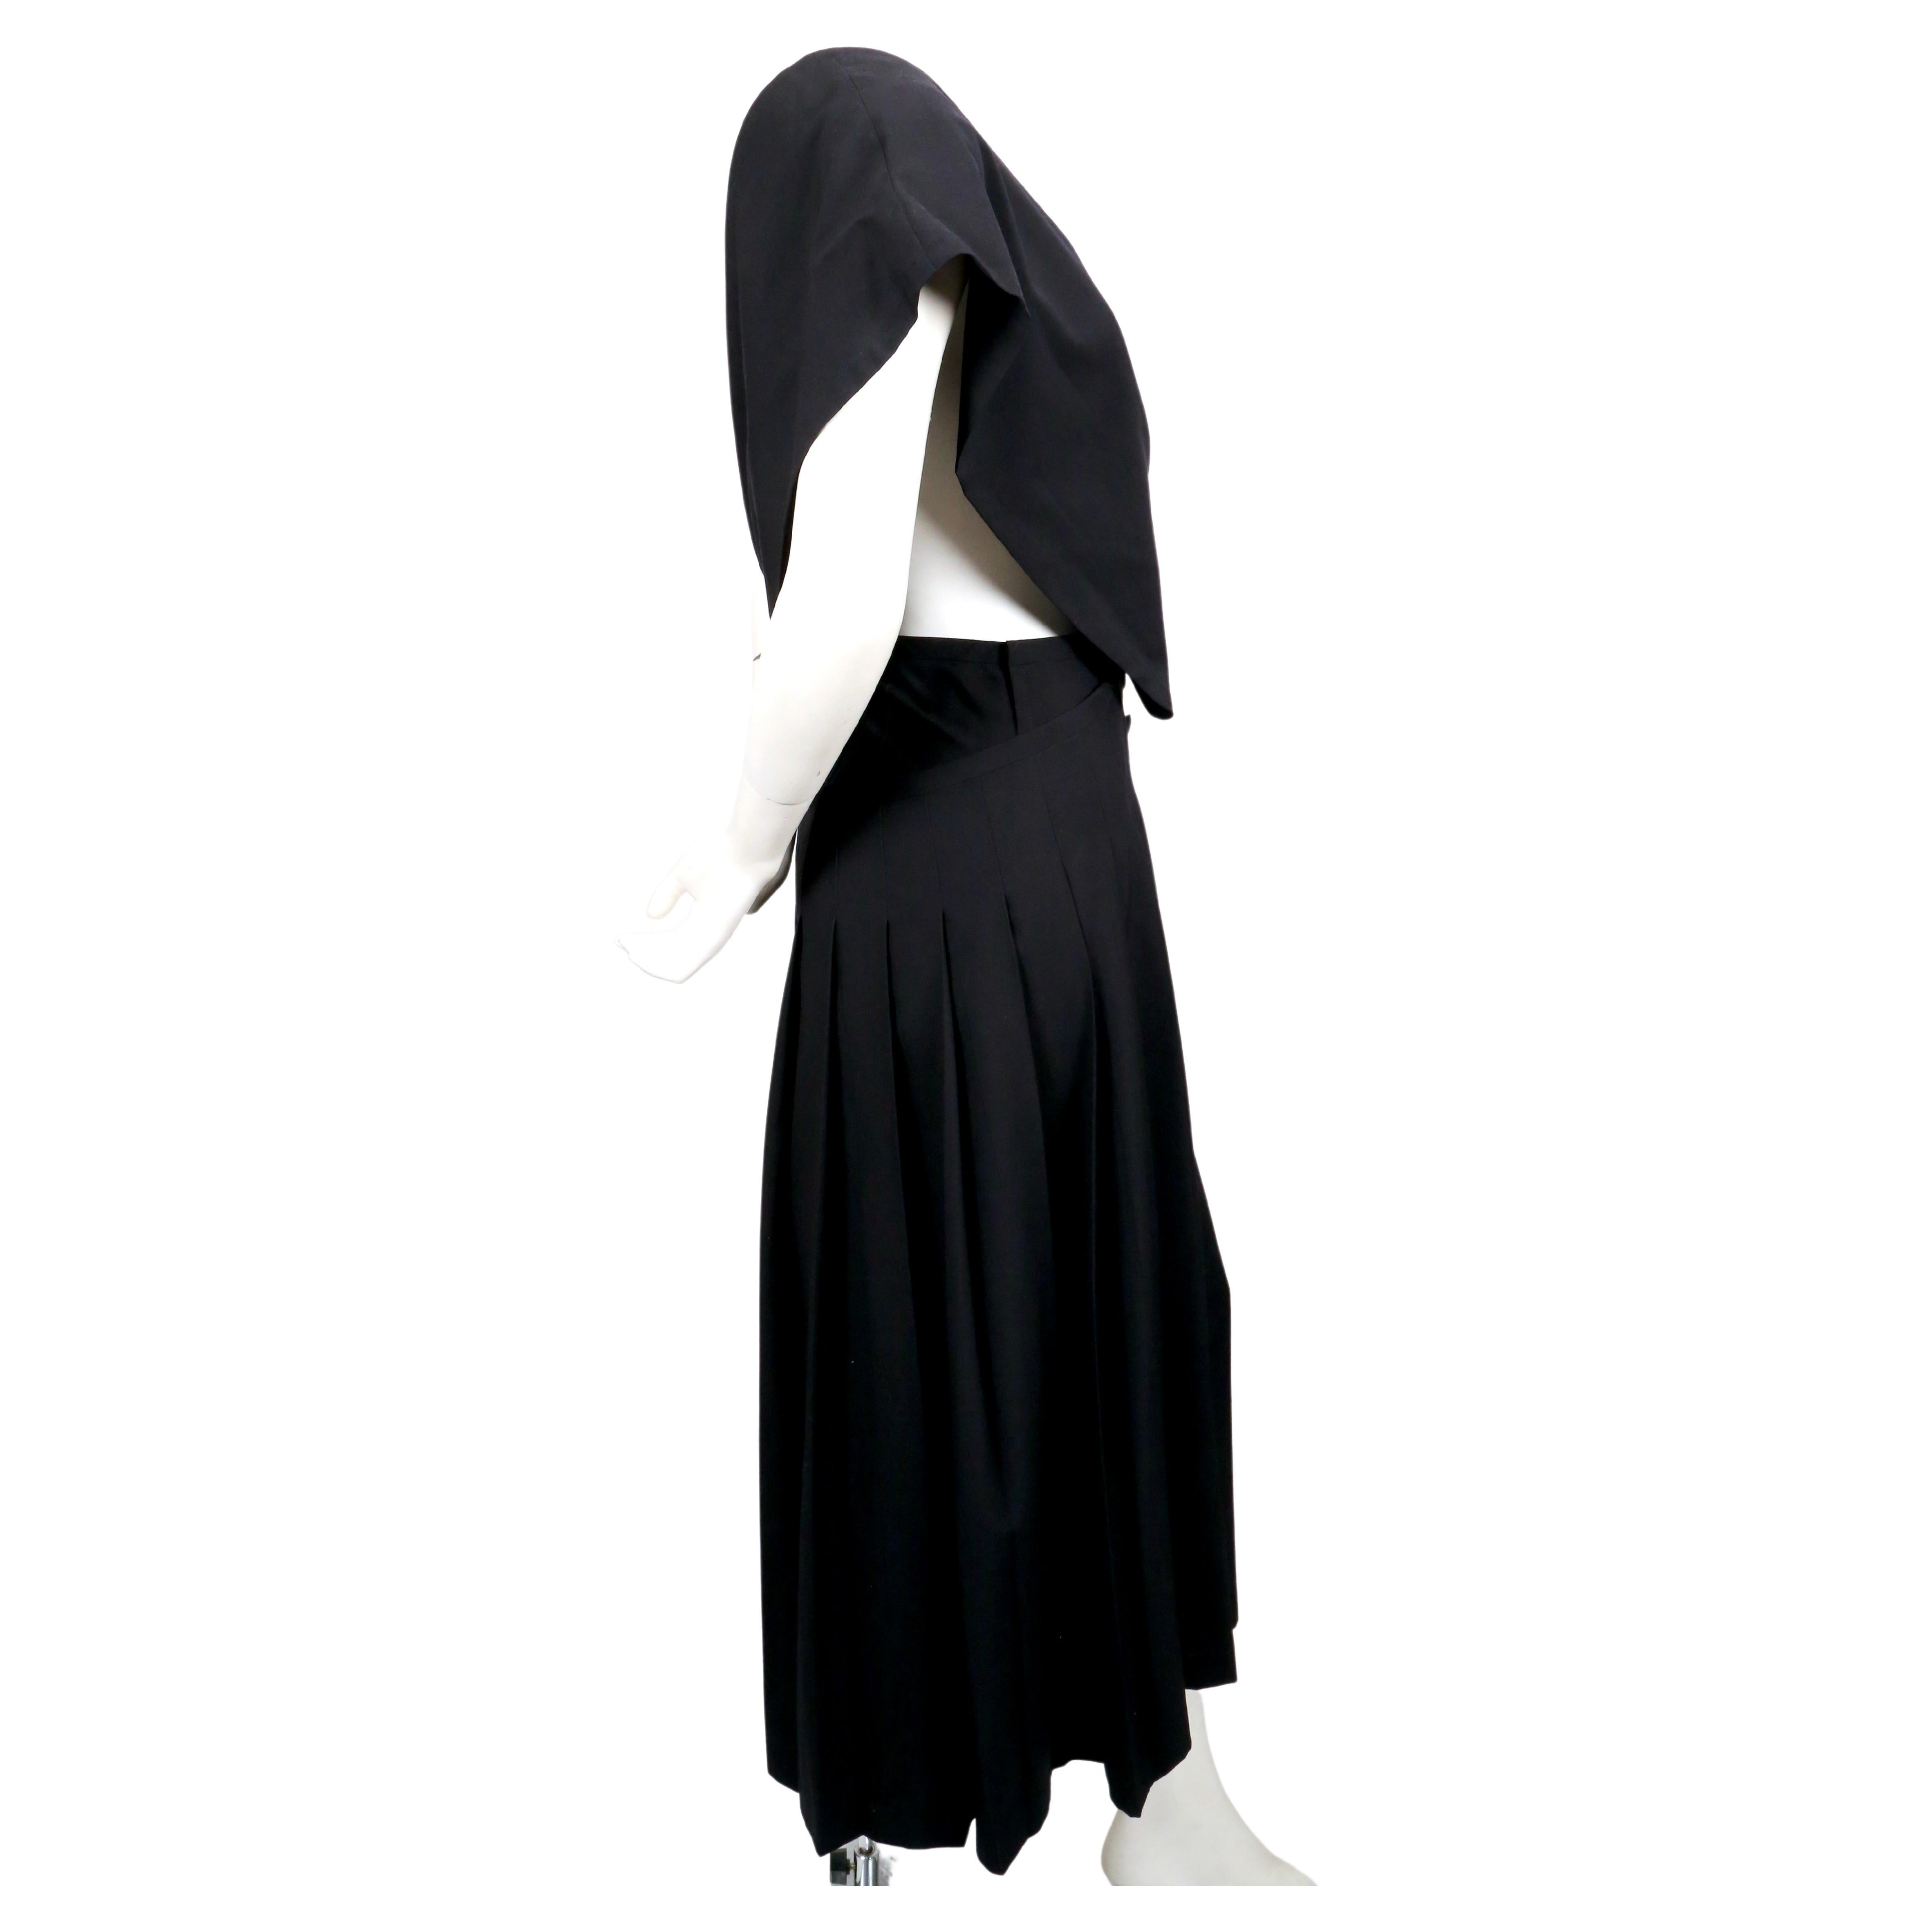 1989 COMME DES GARCONS black asymmetrical one shoulder wrap dress In Good Condition For Sale In San Fransisco, CA